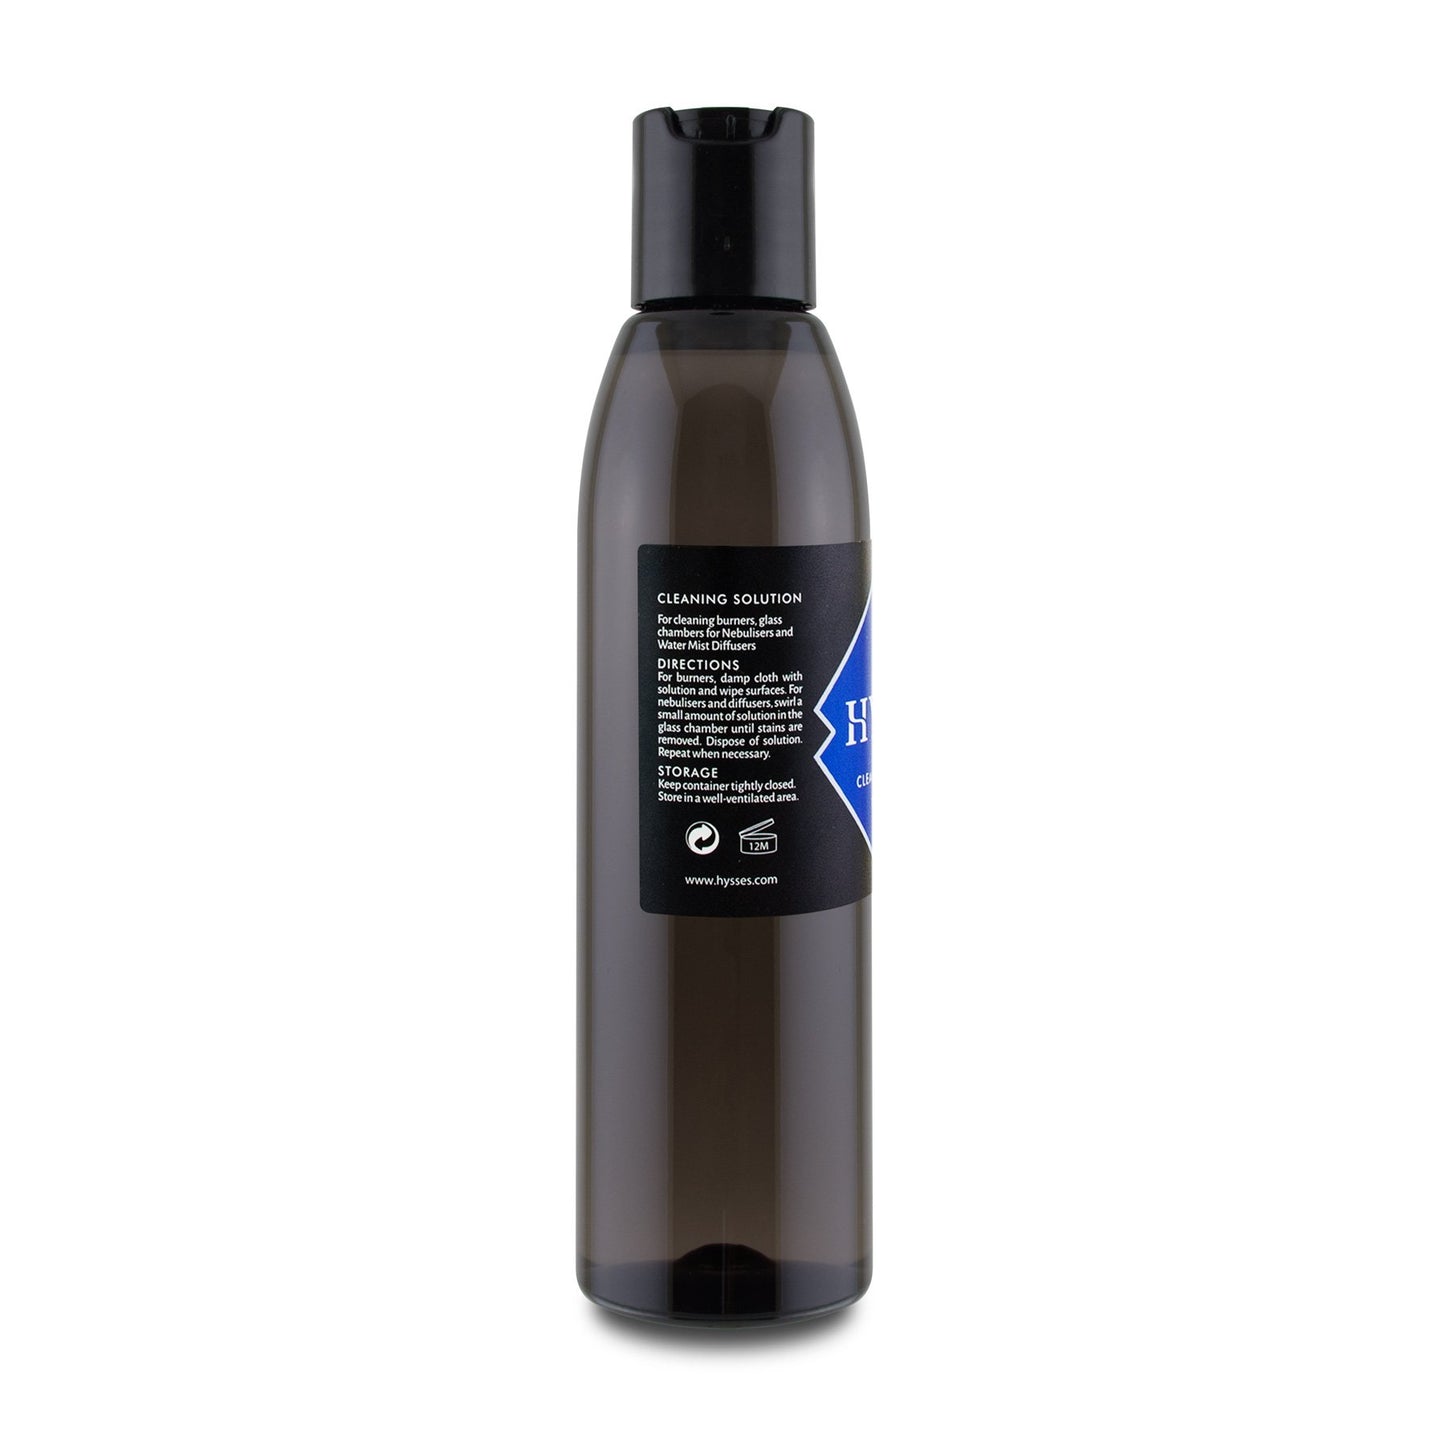 Hysses Cleaning Solution - Burners and Devices 165ml